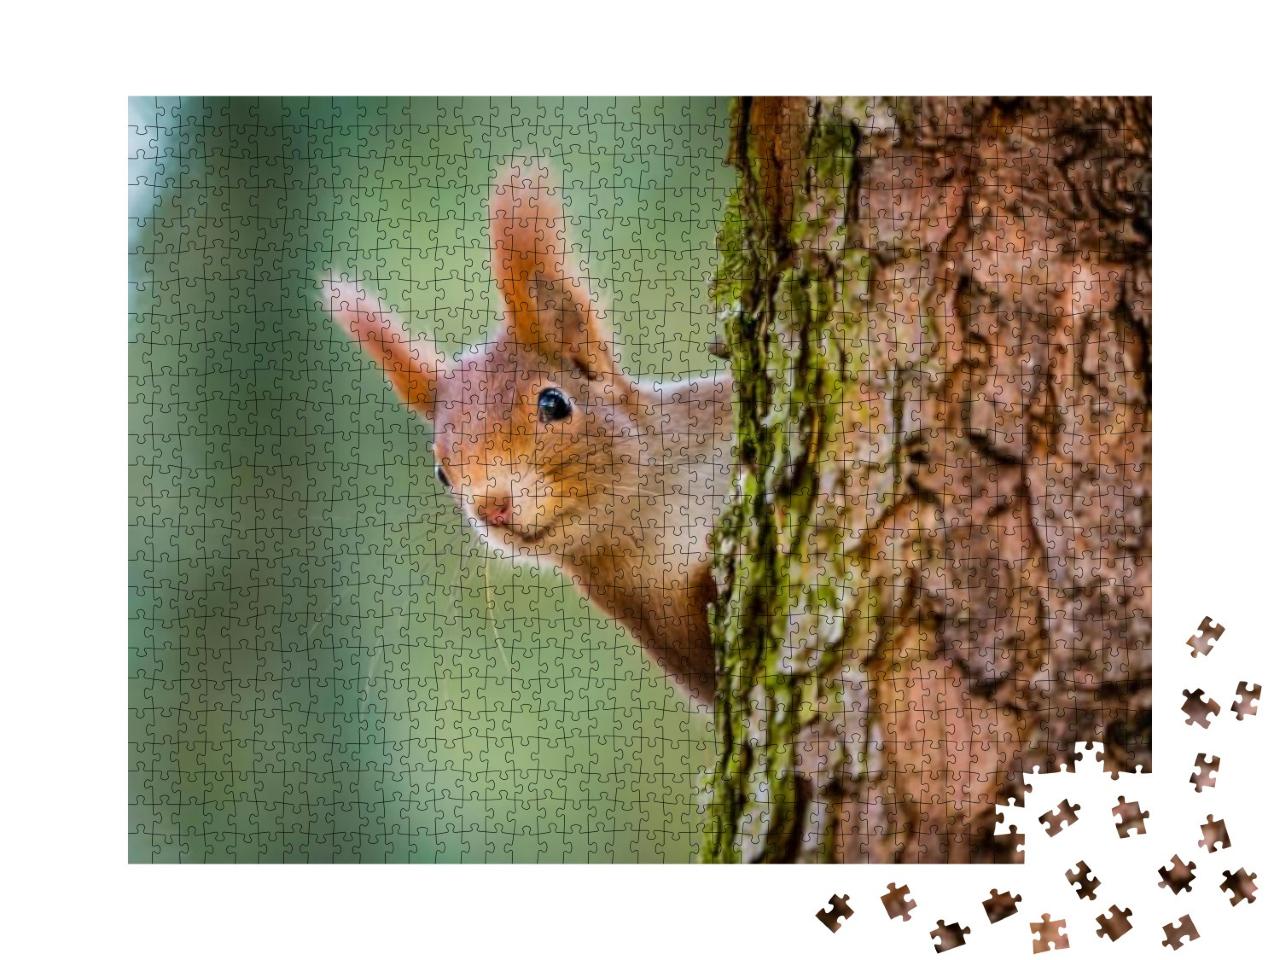 Curious Red Squirrel Peeking Behind the Tree Trunk... Jigsaw Puzzle with 1000 pieces